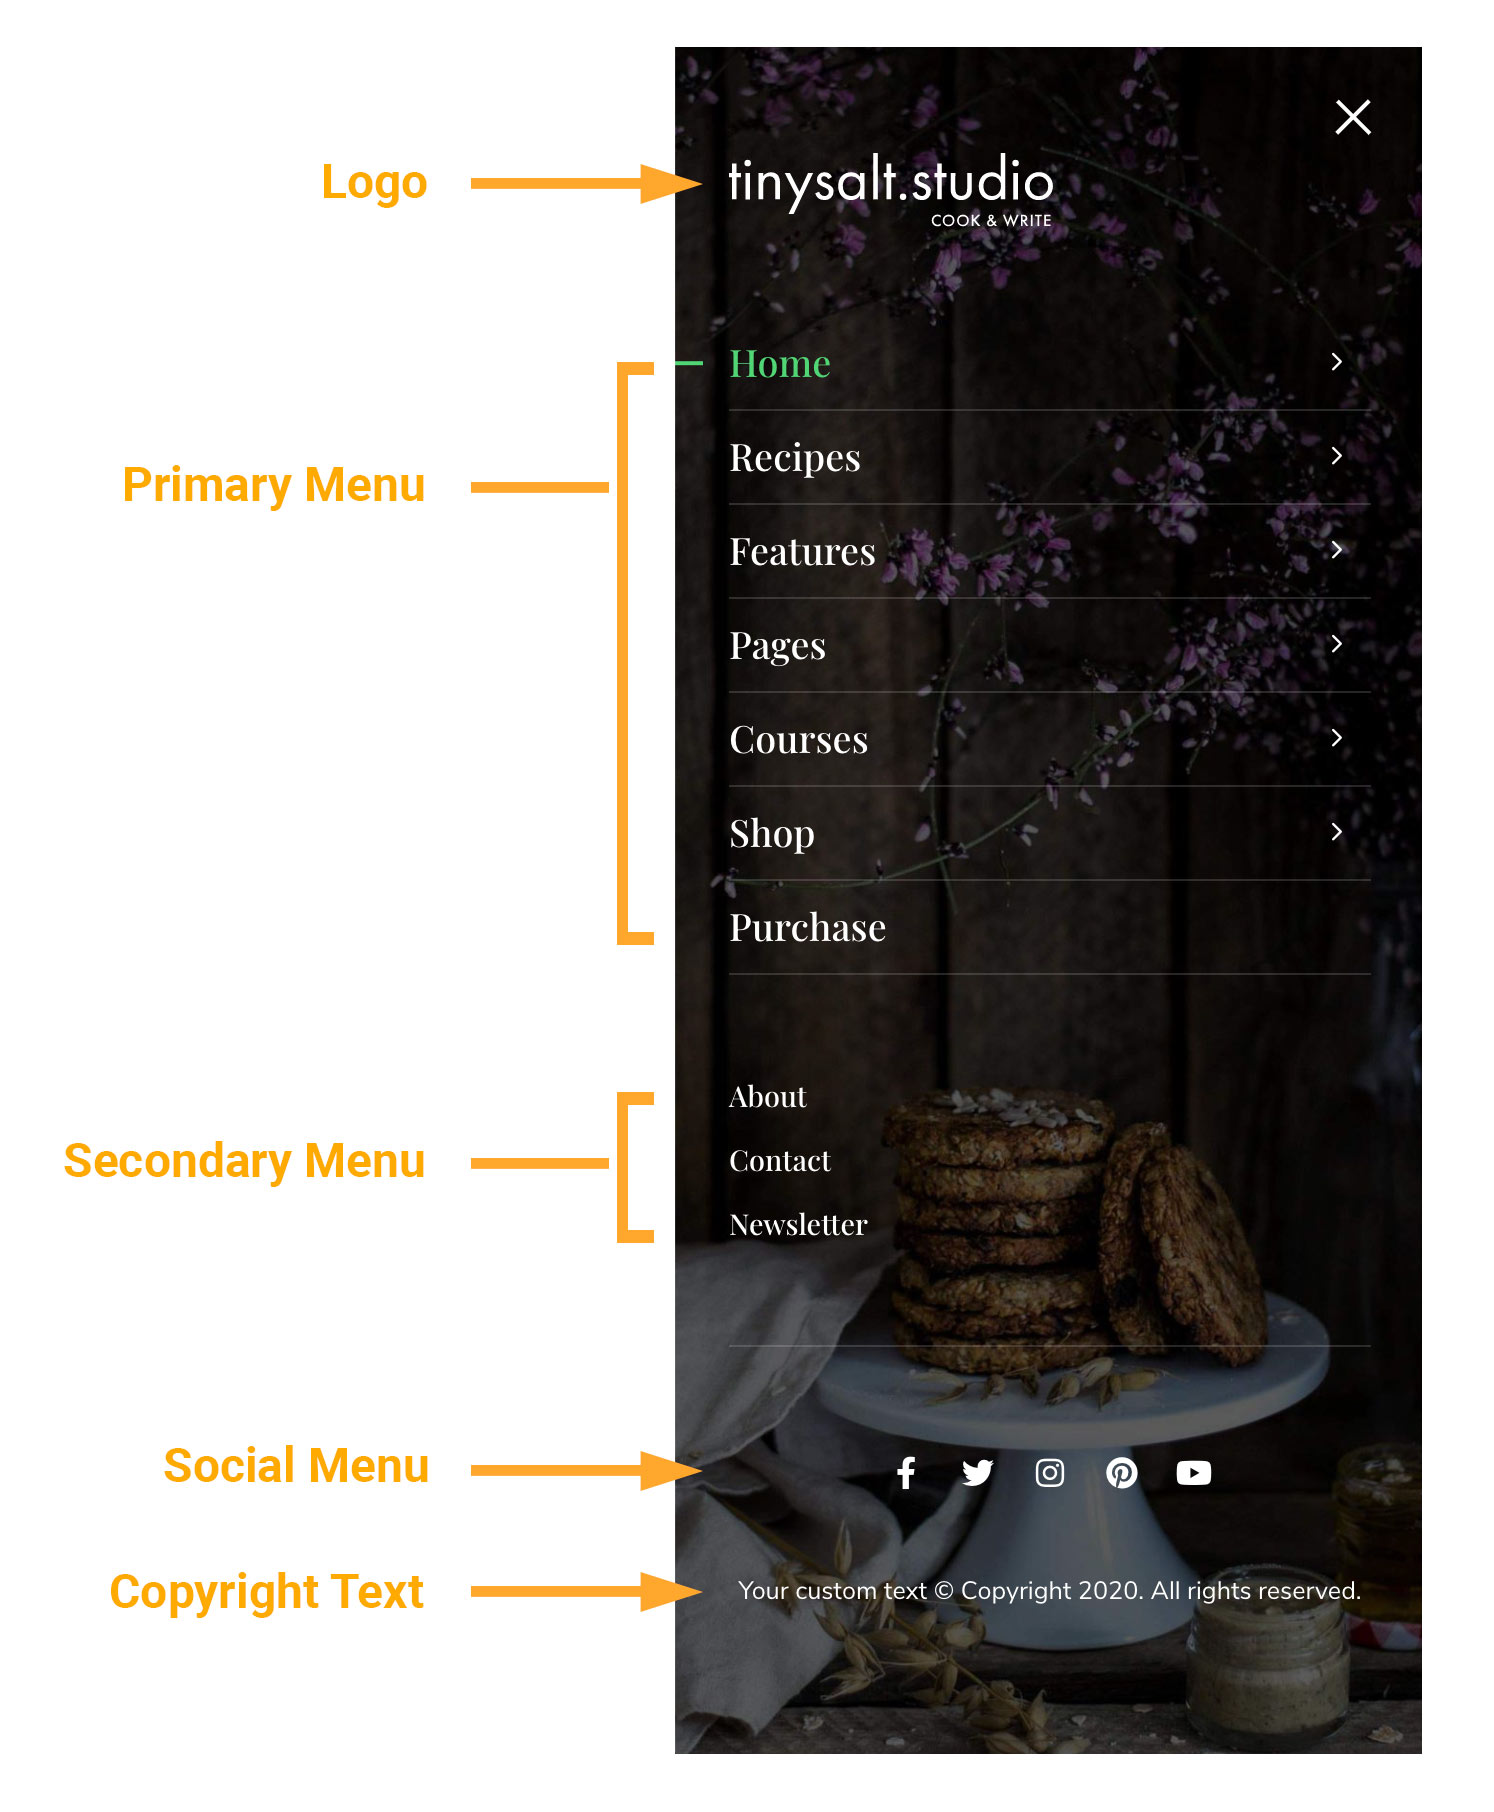 Elements in the mobile menu